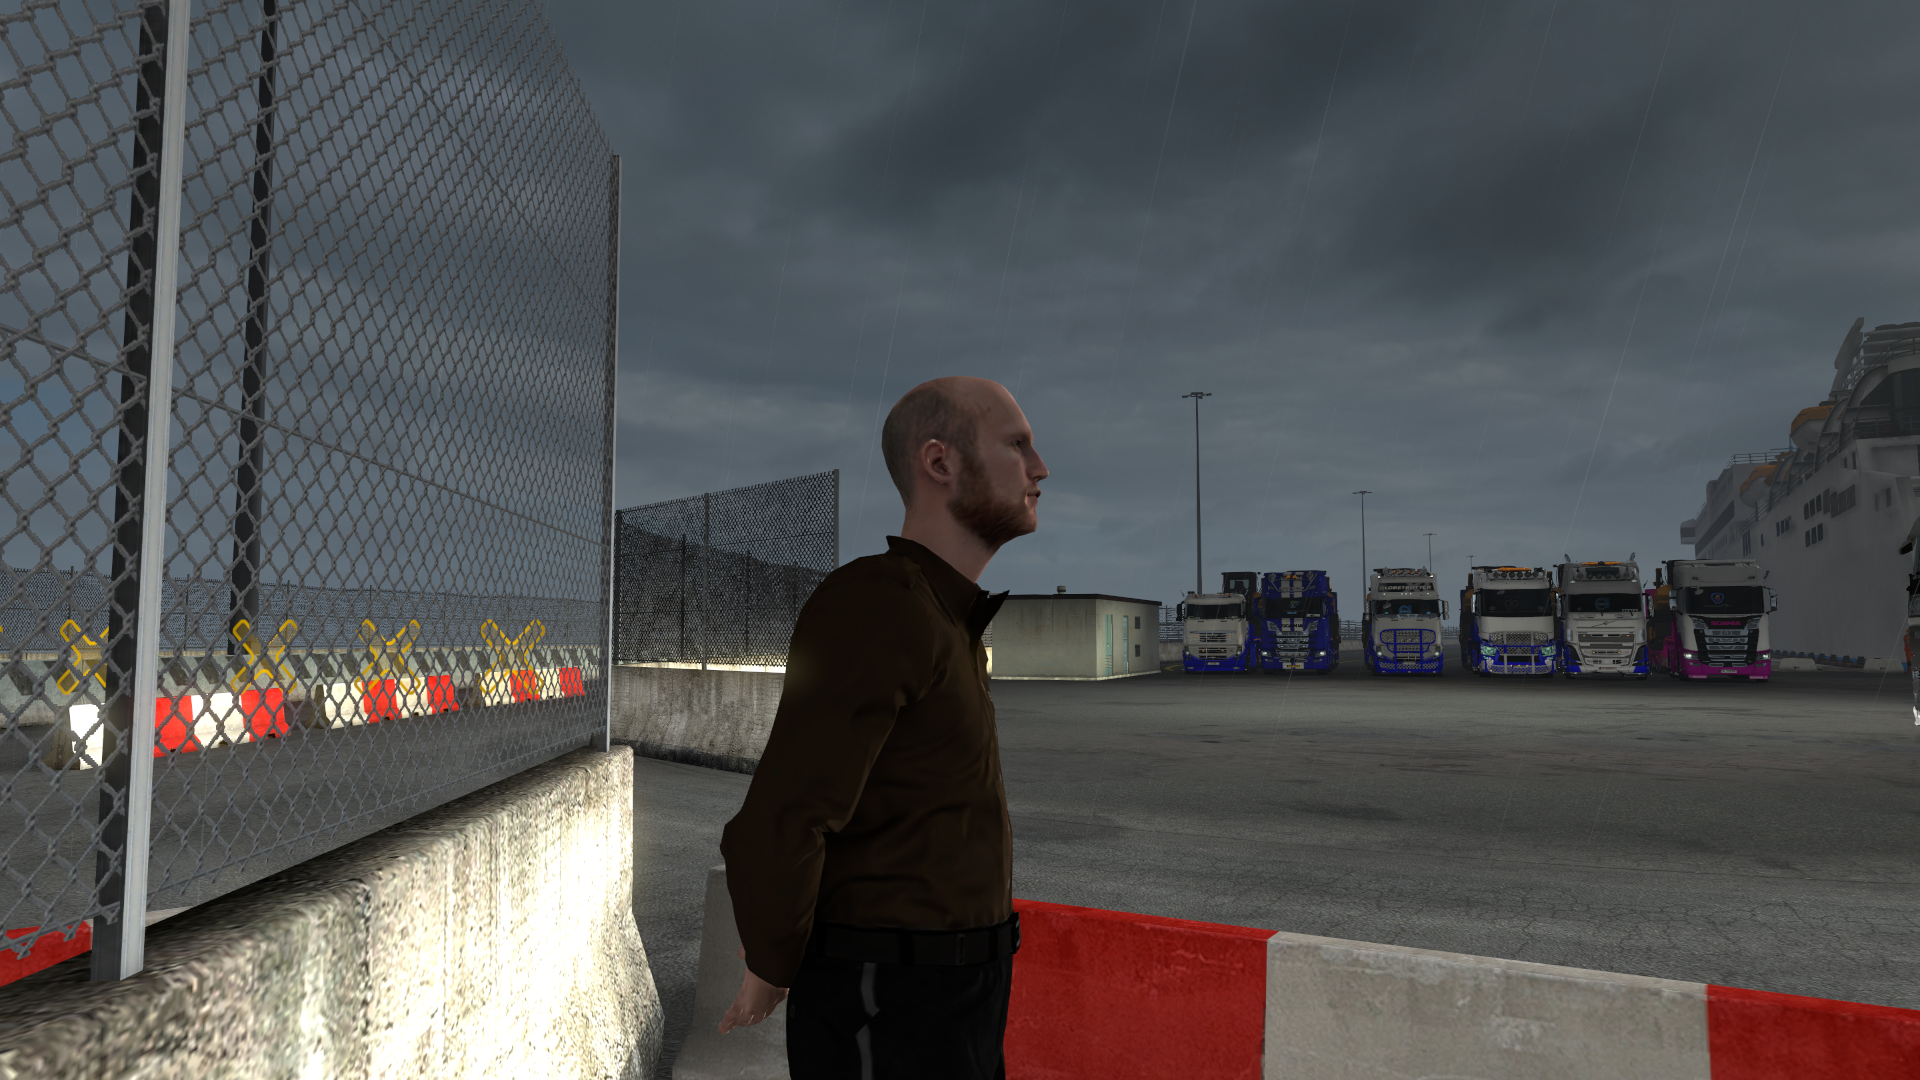 ets2_20210402_230239_00.png